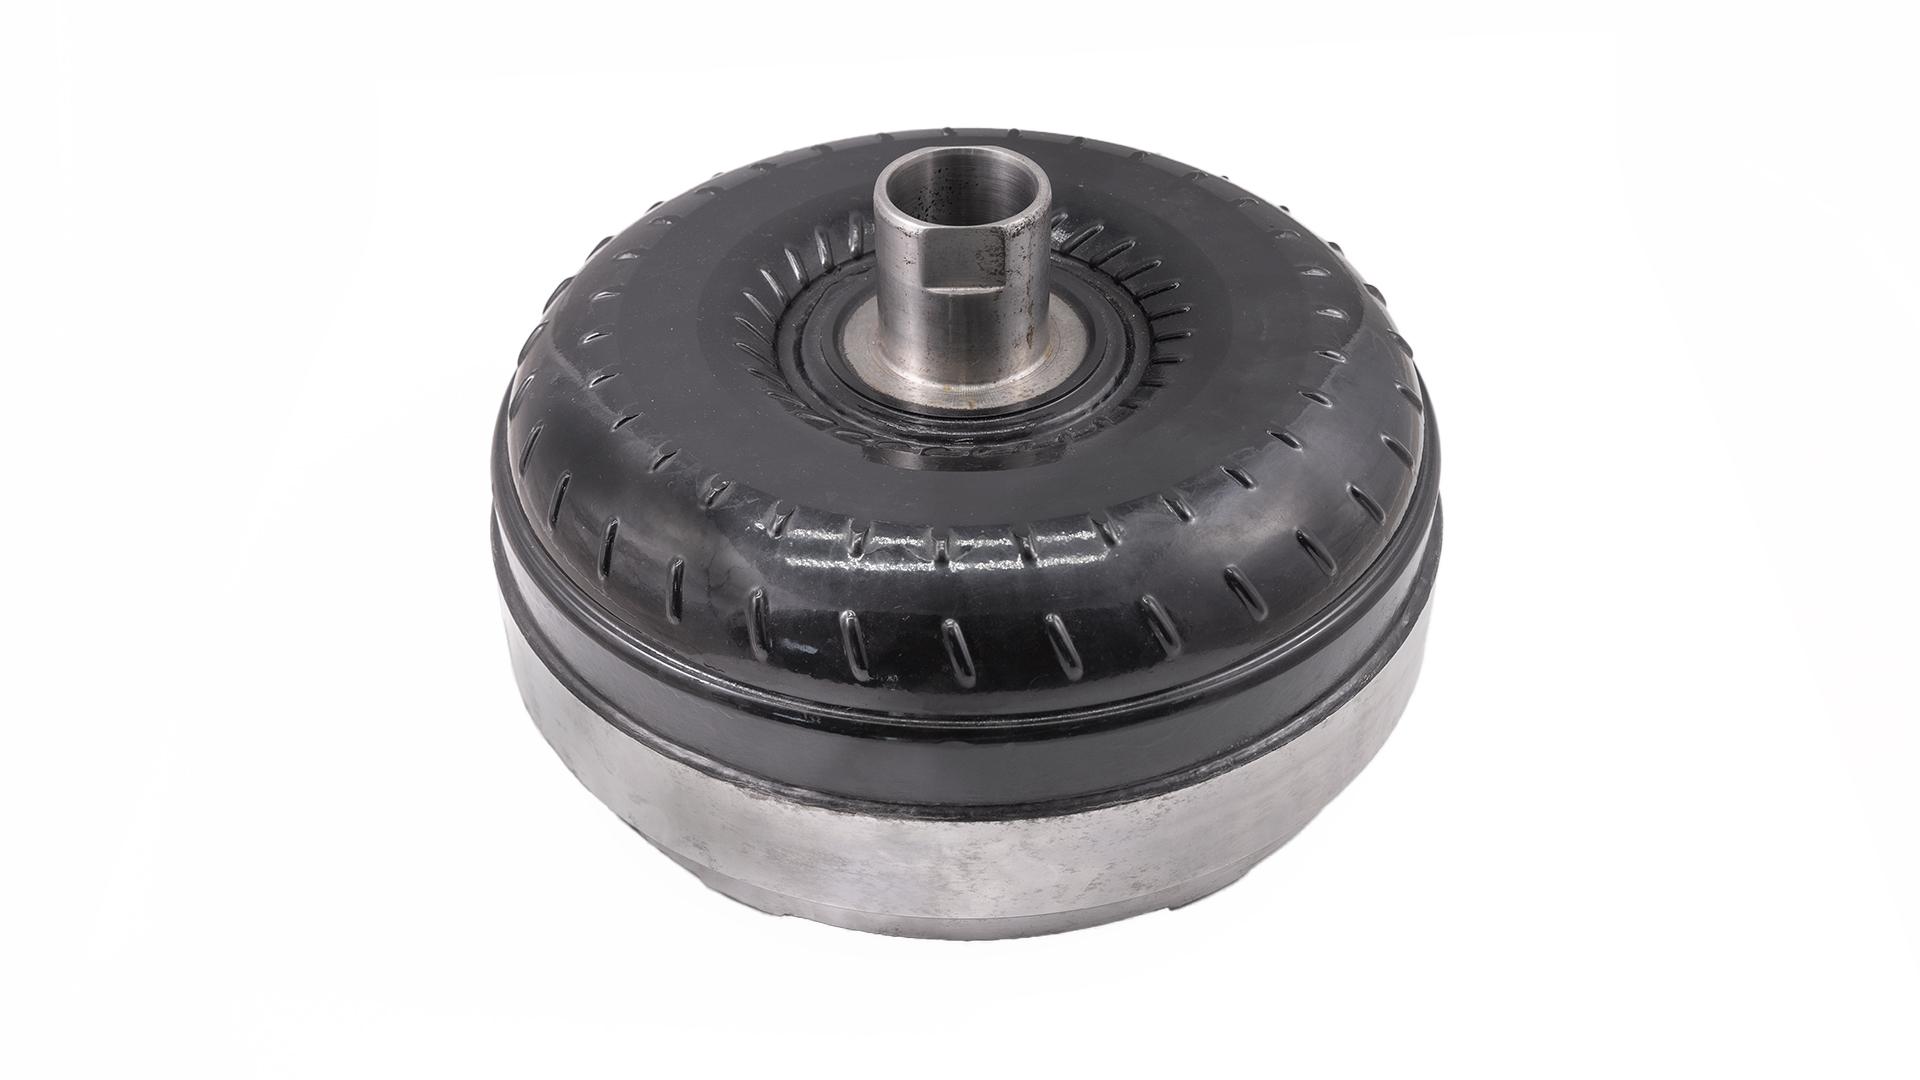 Torque Converter to fit your needs